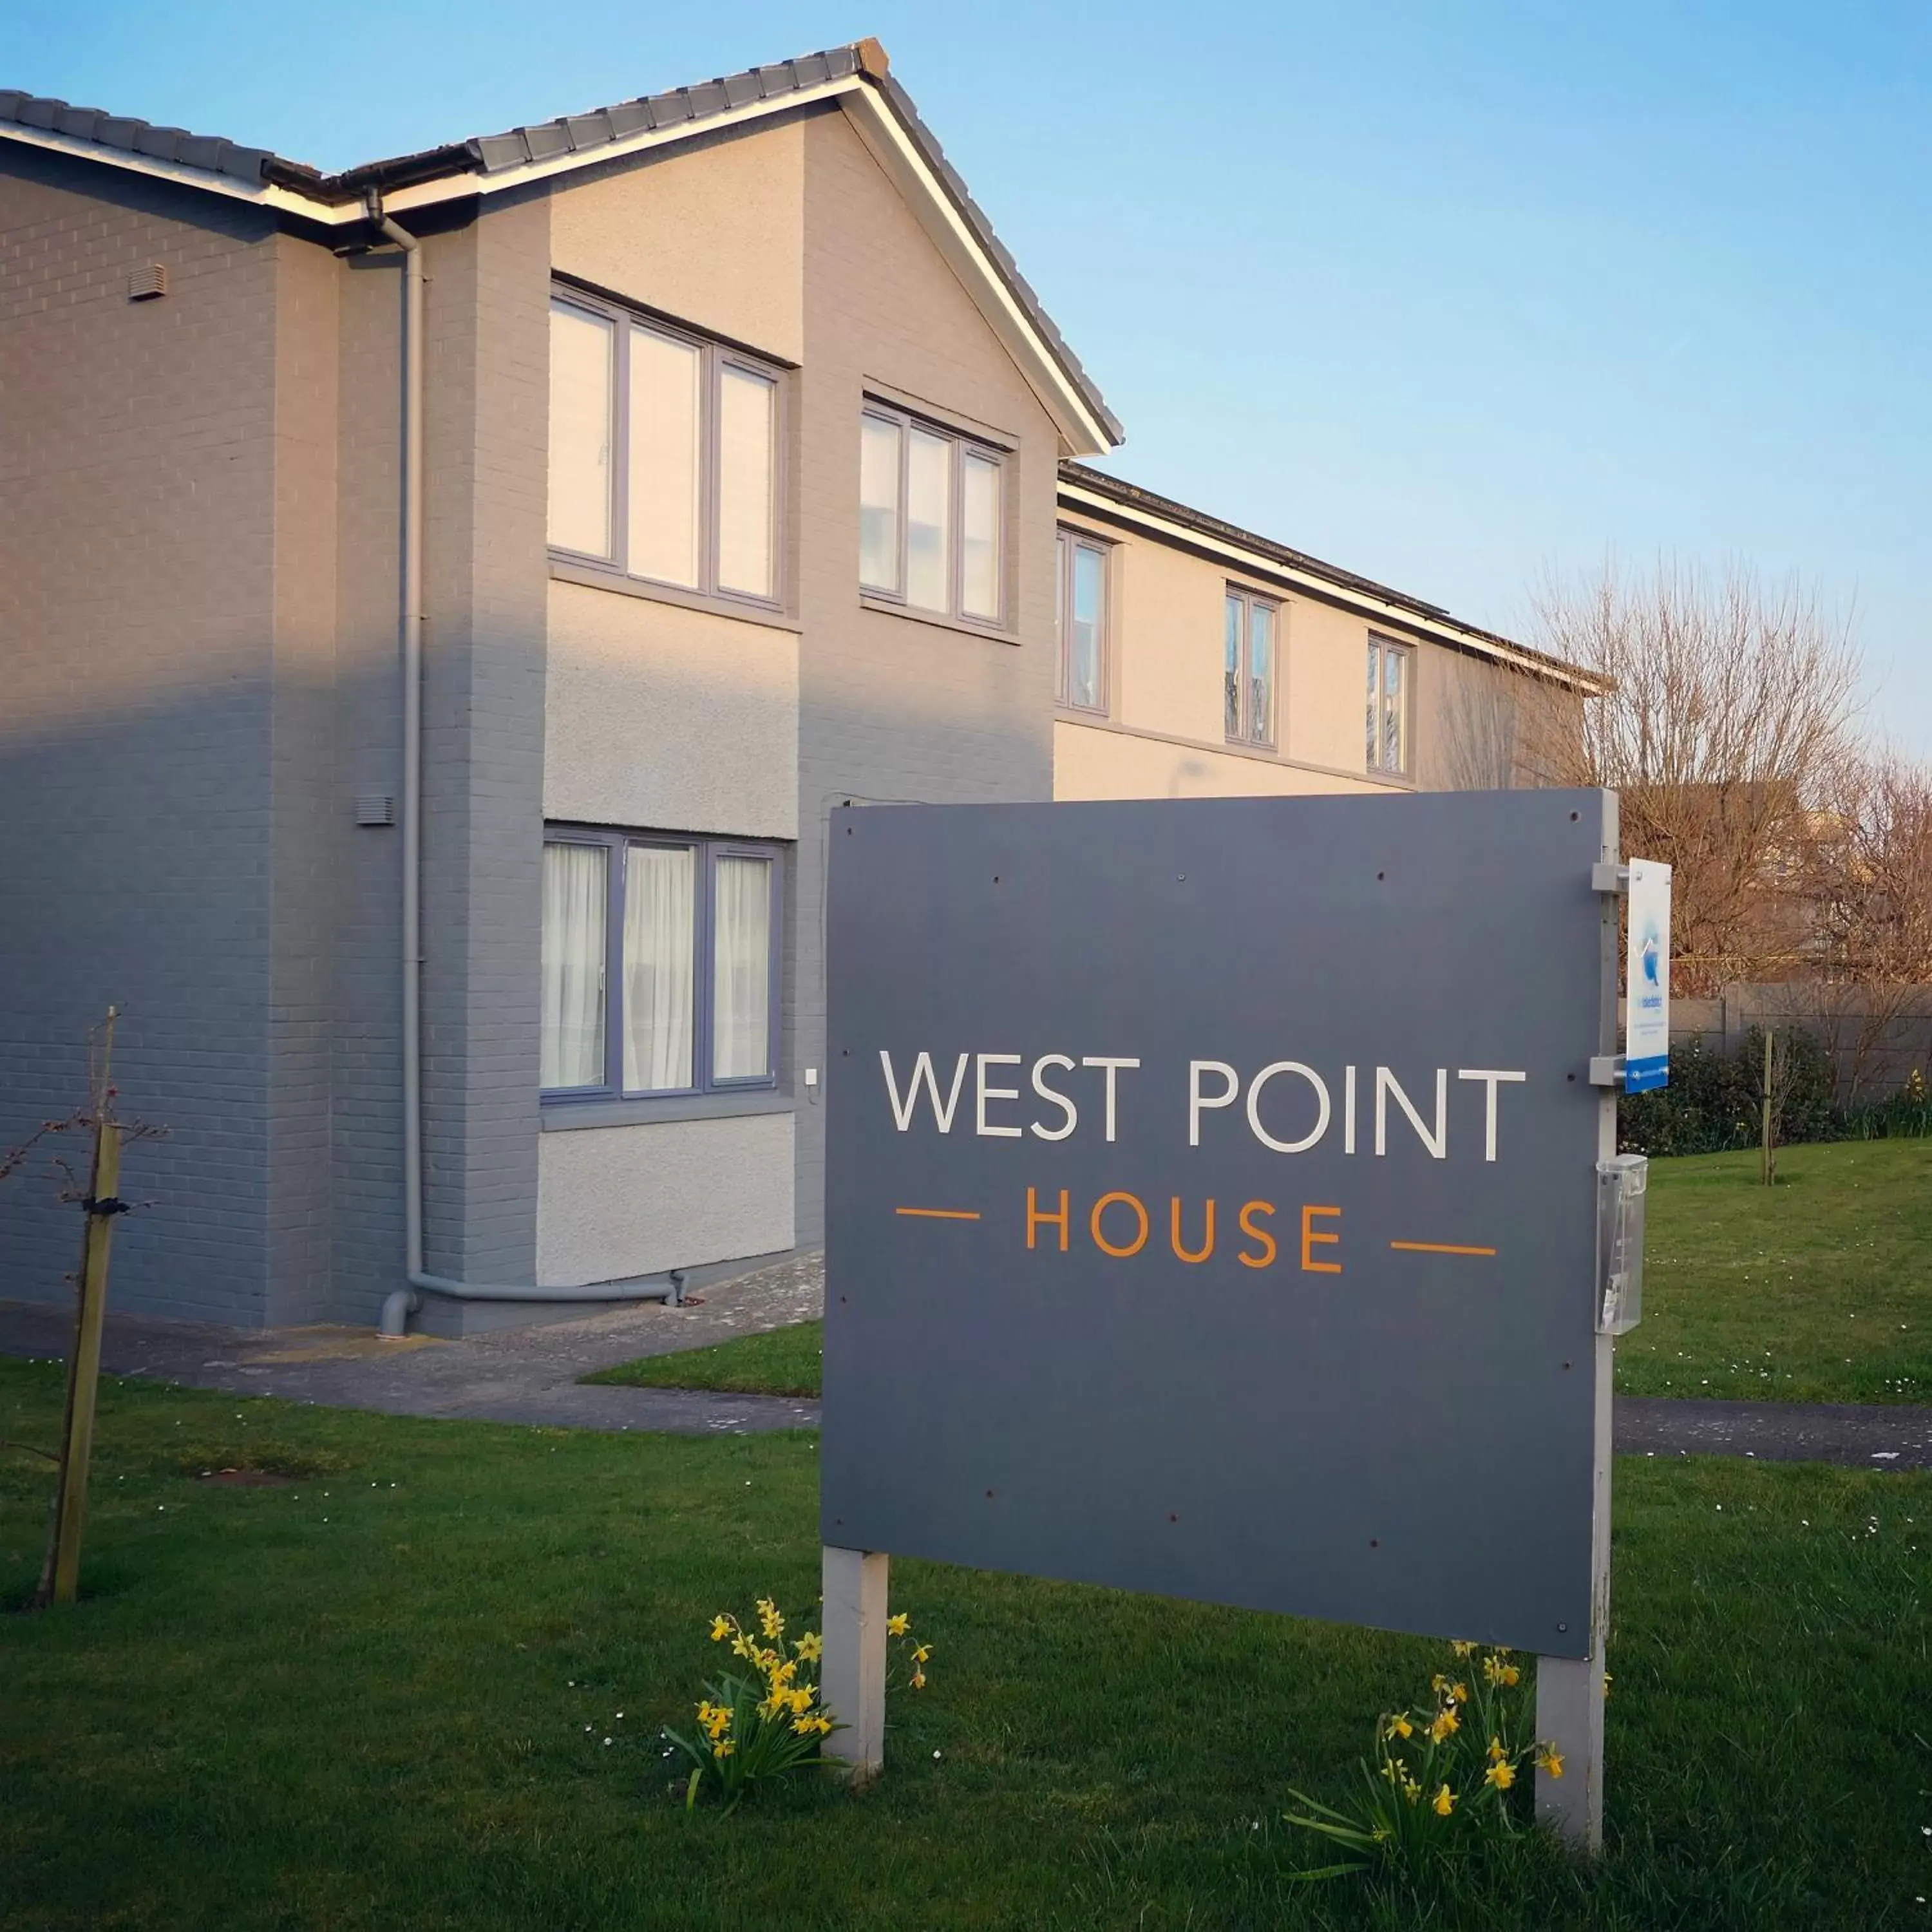 Property logo or sign, Property Building in West Point House